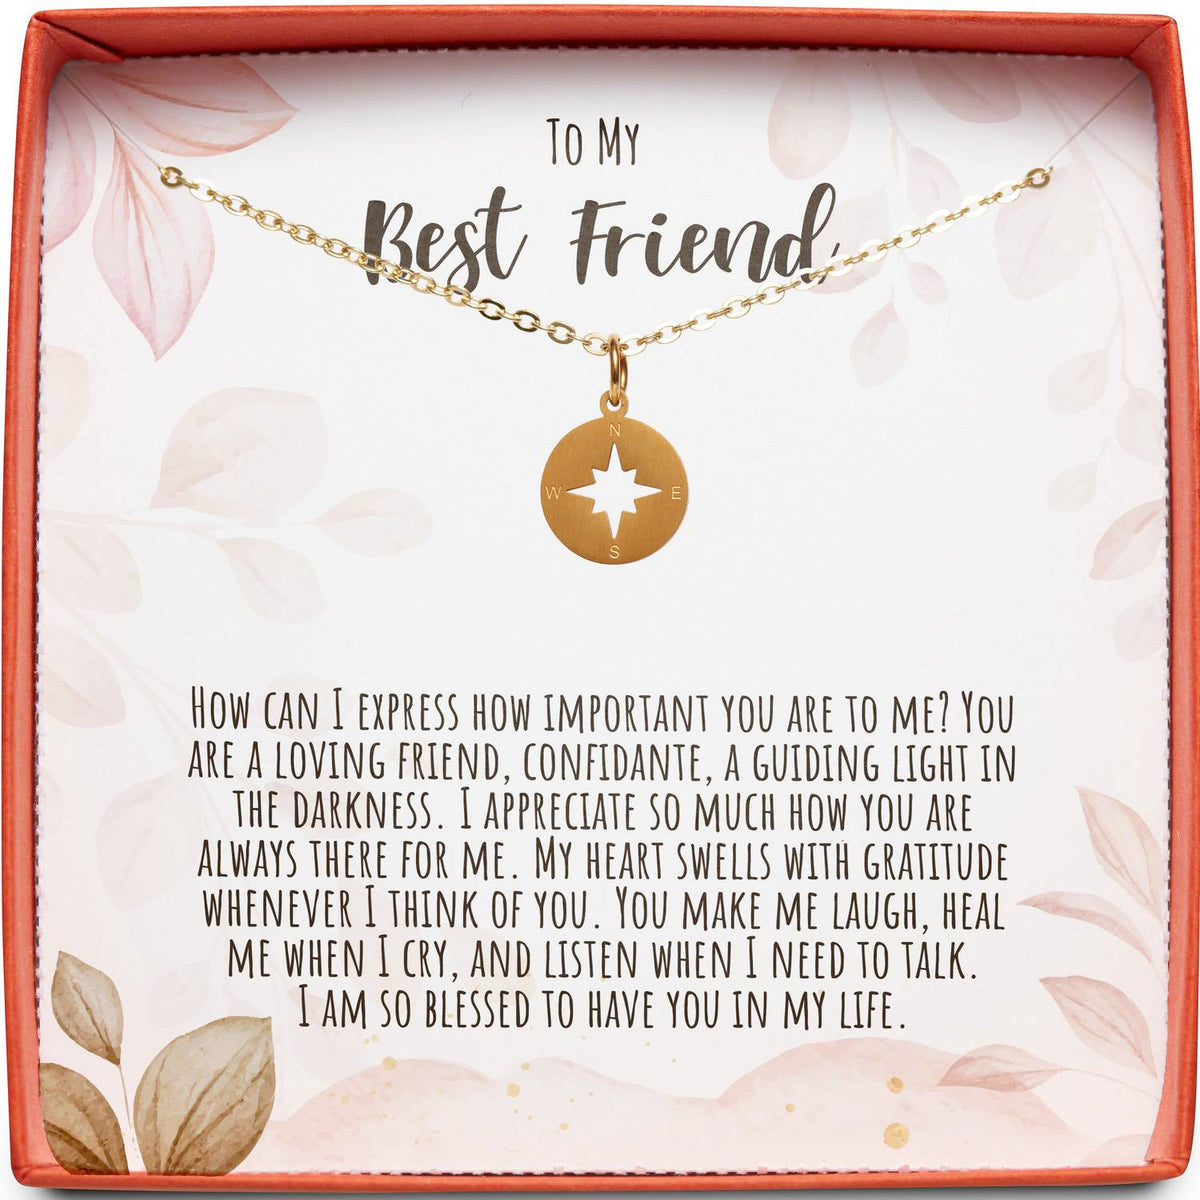 To My Best Friend | Guiding Light in the Darkness | Compass Necklace